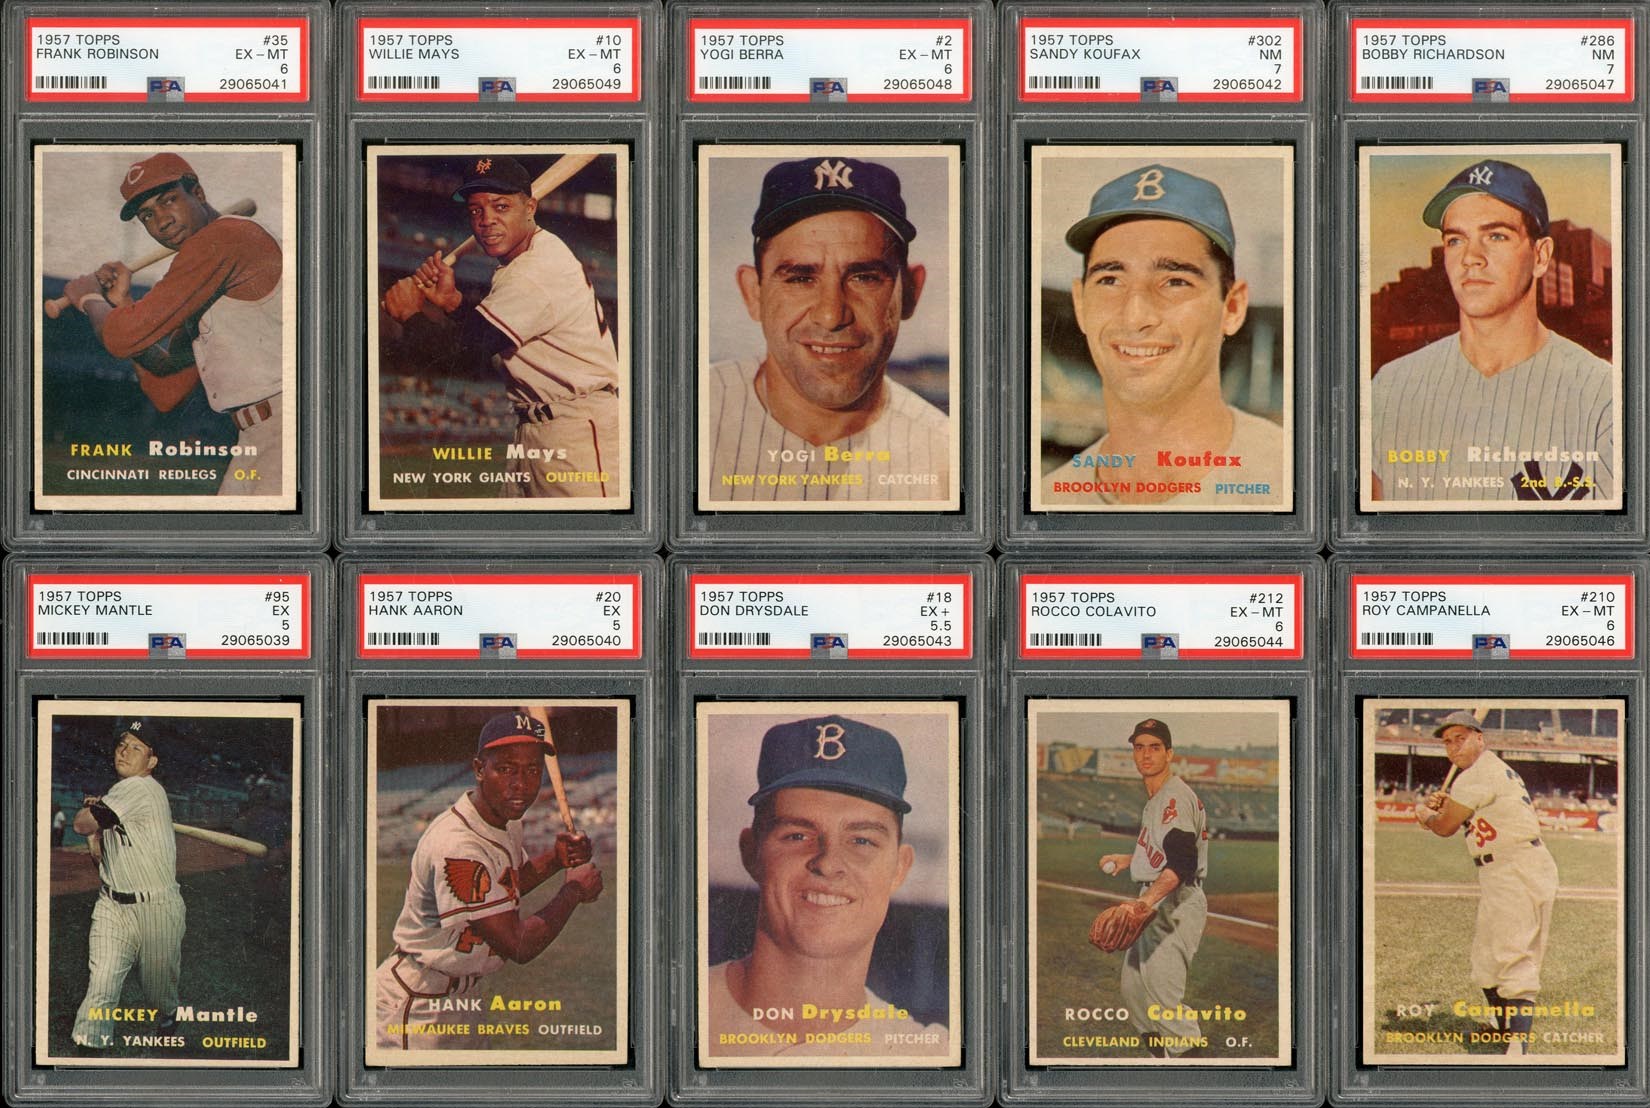 Baseball and Trading Cards - 1957 Topps Complete Set of 407 Cards with 13 PSA Graded Cards